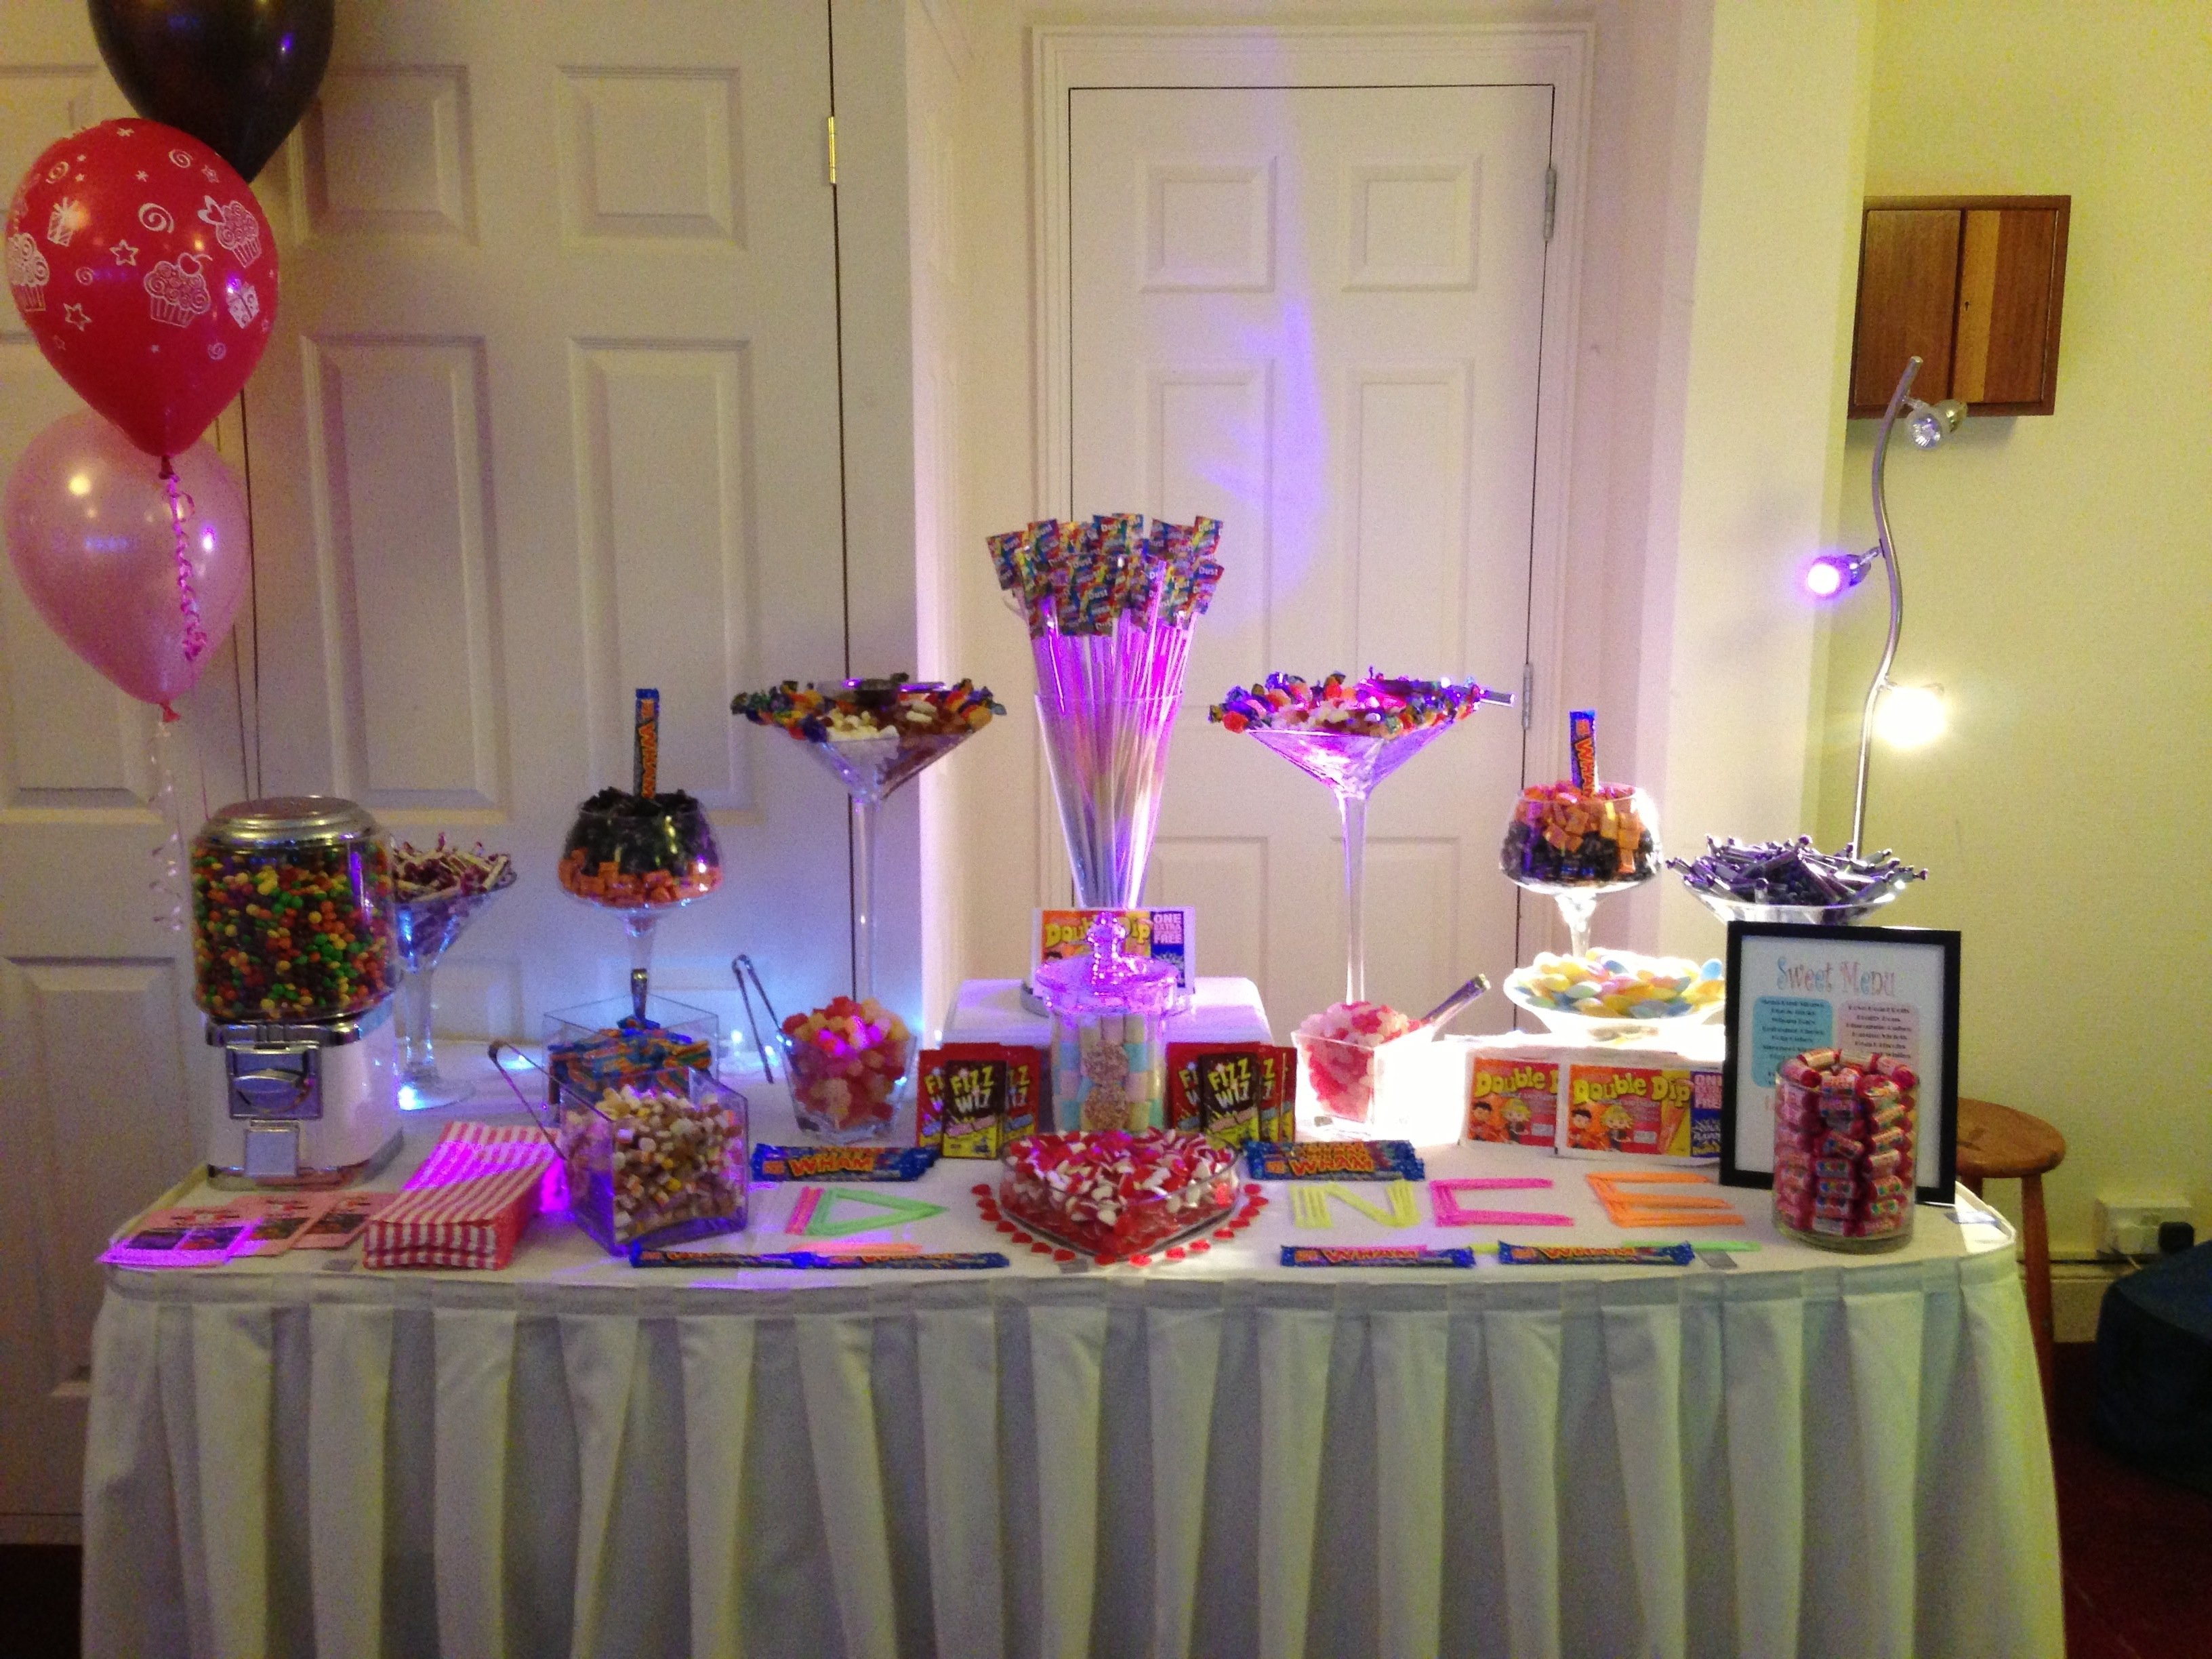 18th Birthday Party Ideas For Winter - Get More Anythink's